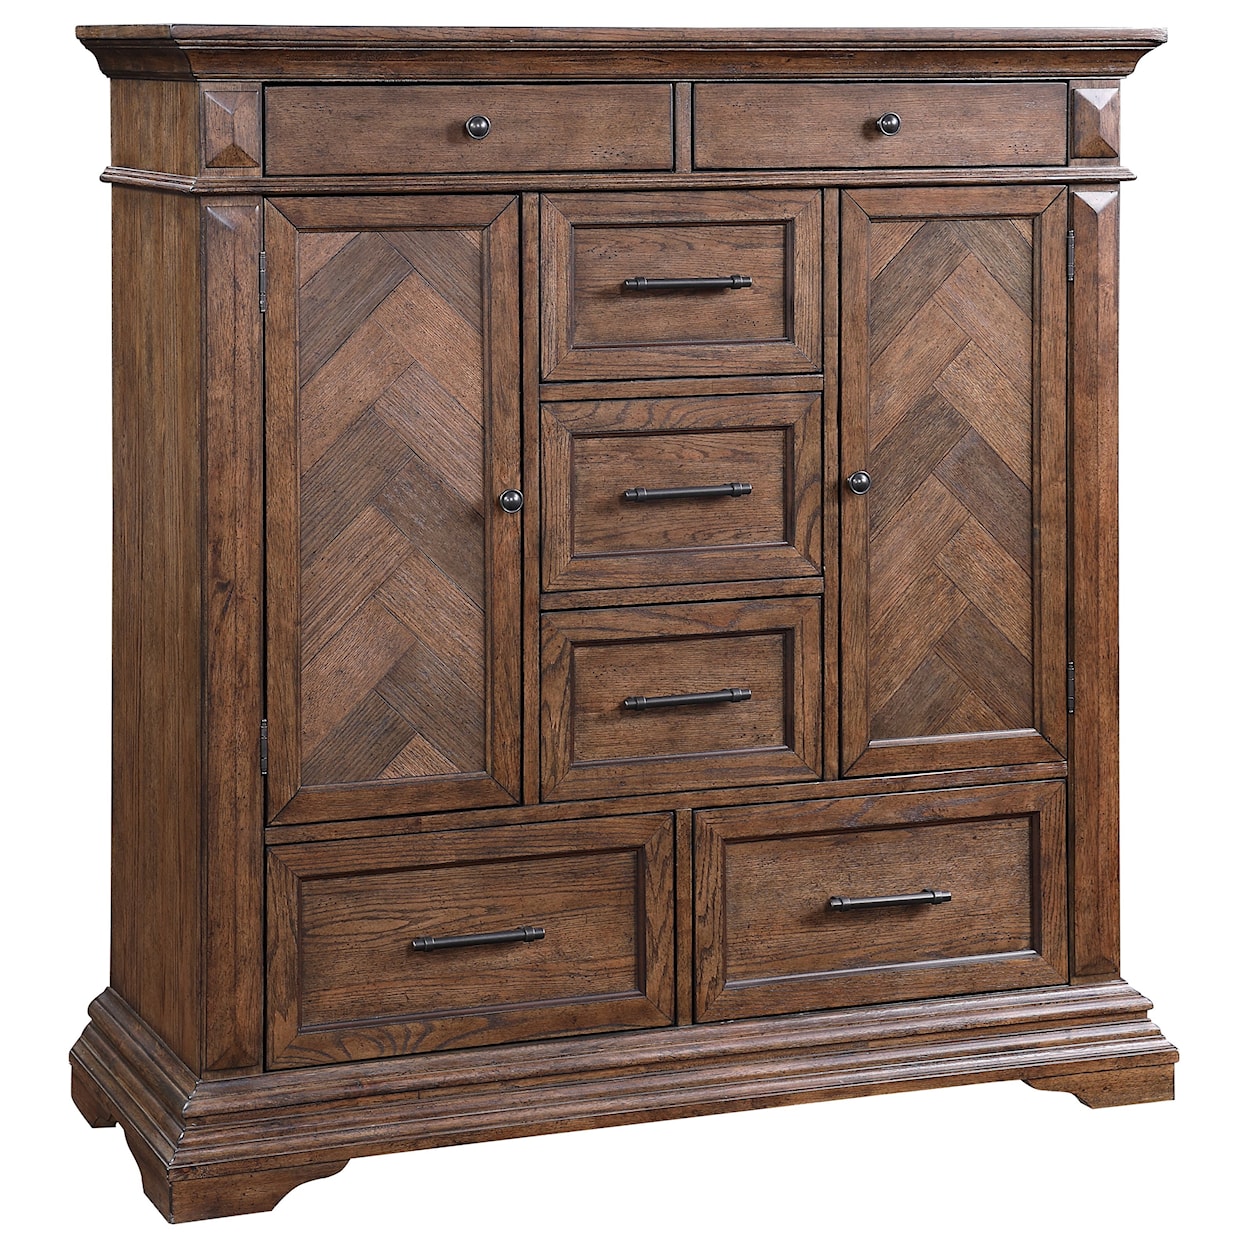 New Classic Mar Vista Chest with Doors